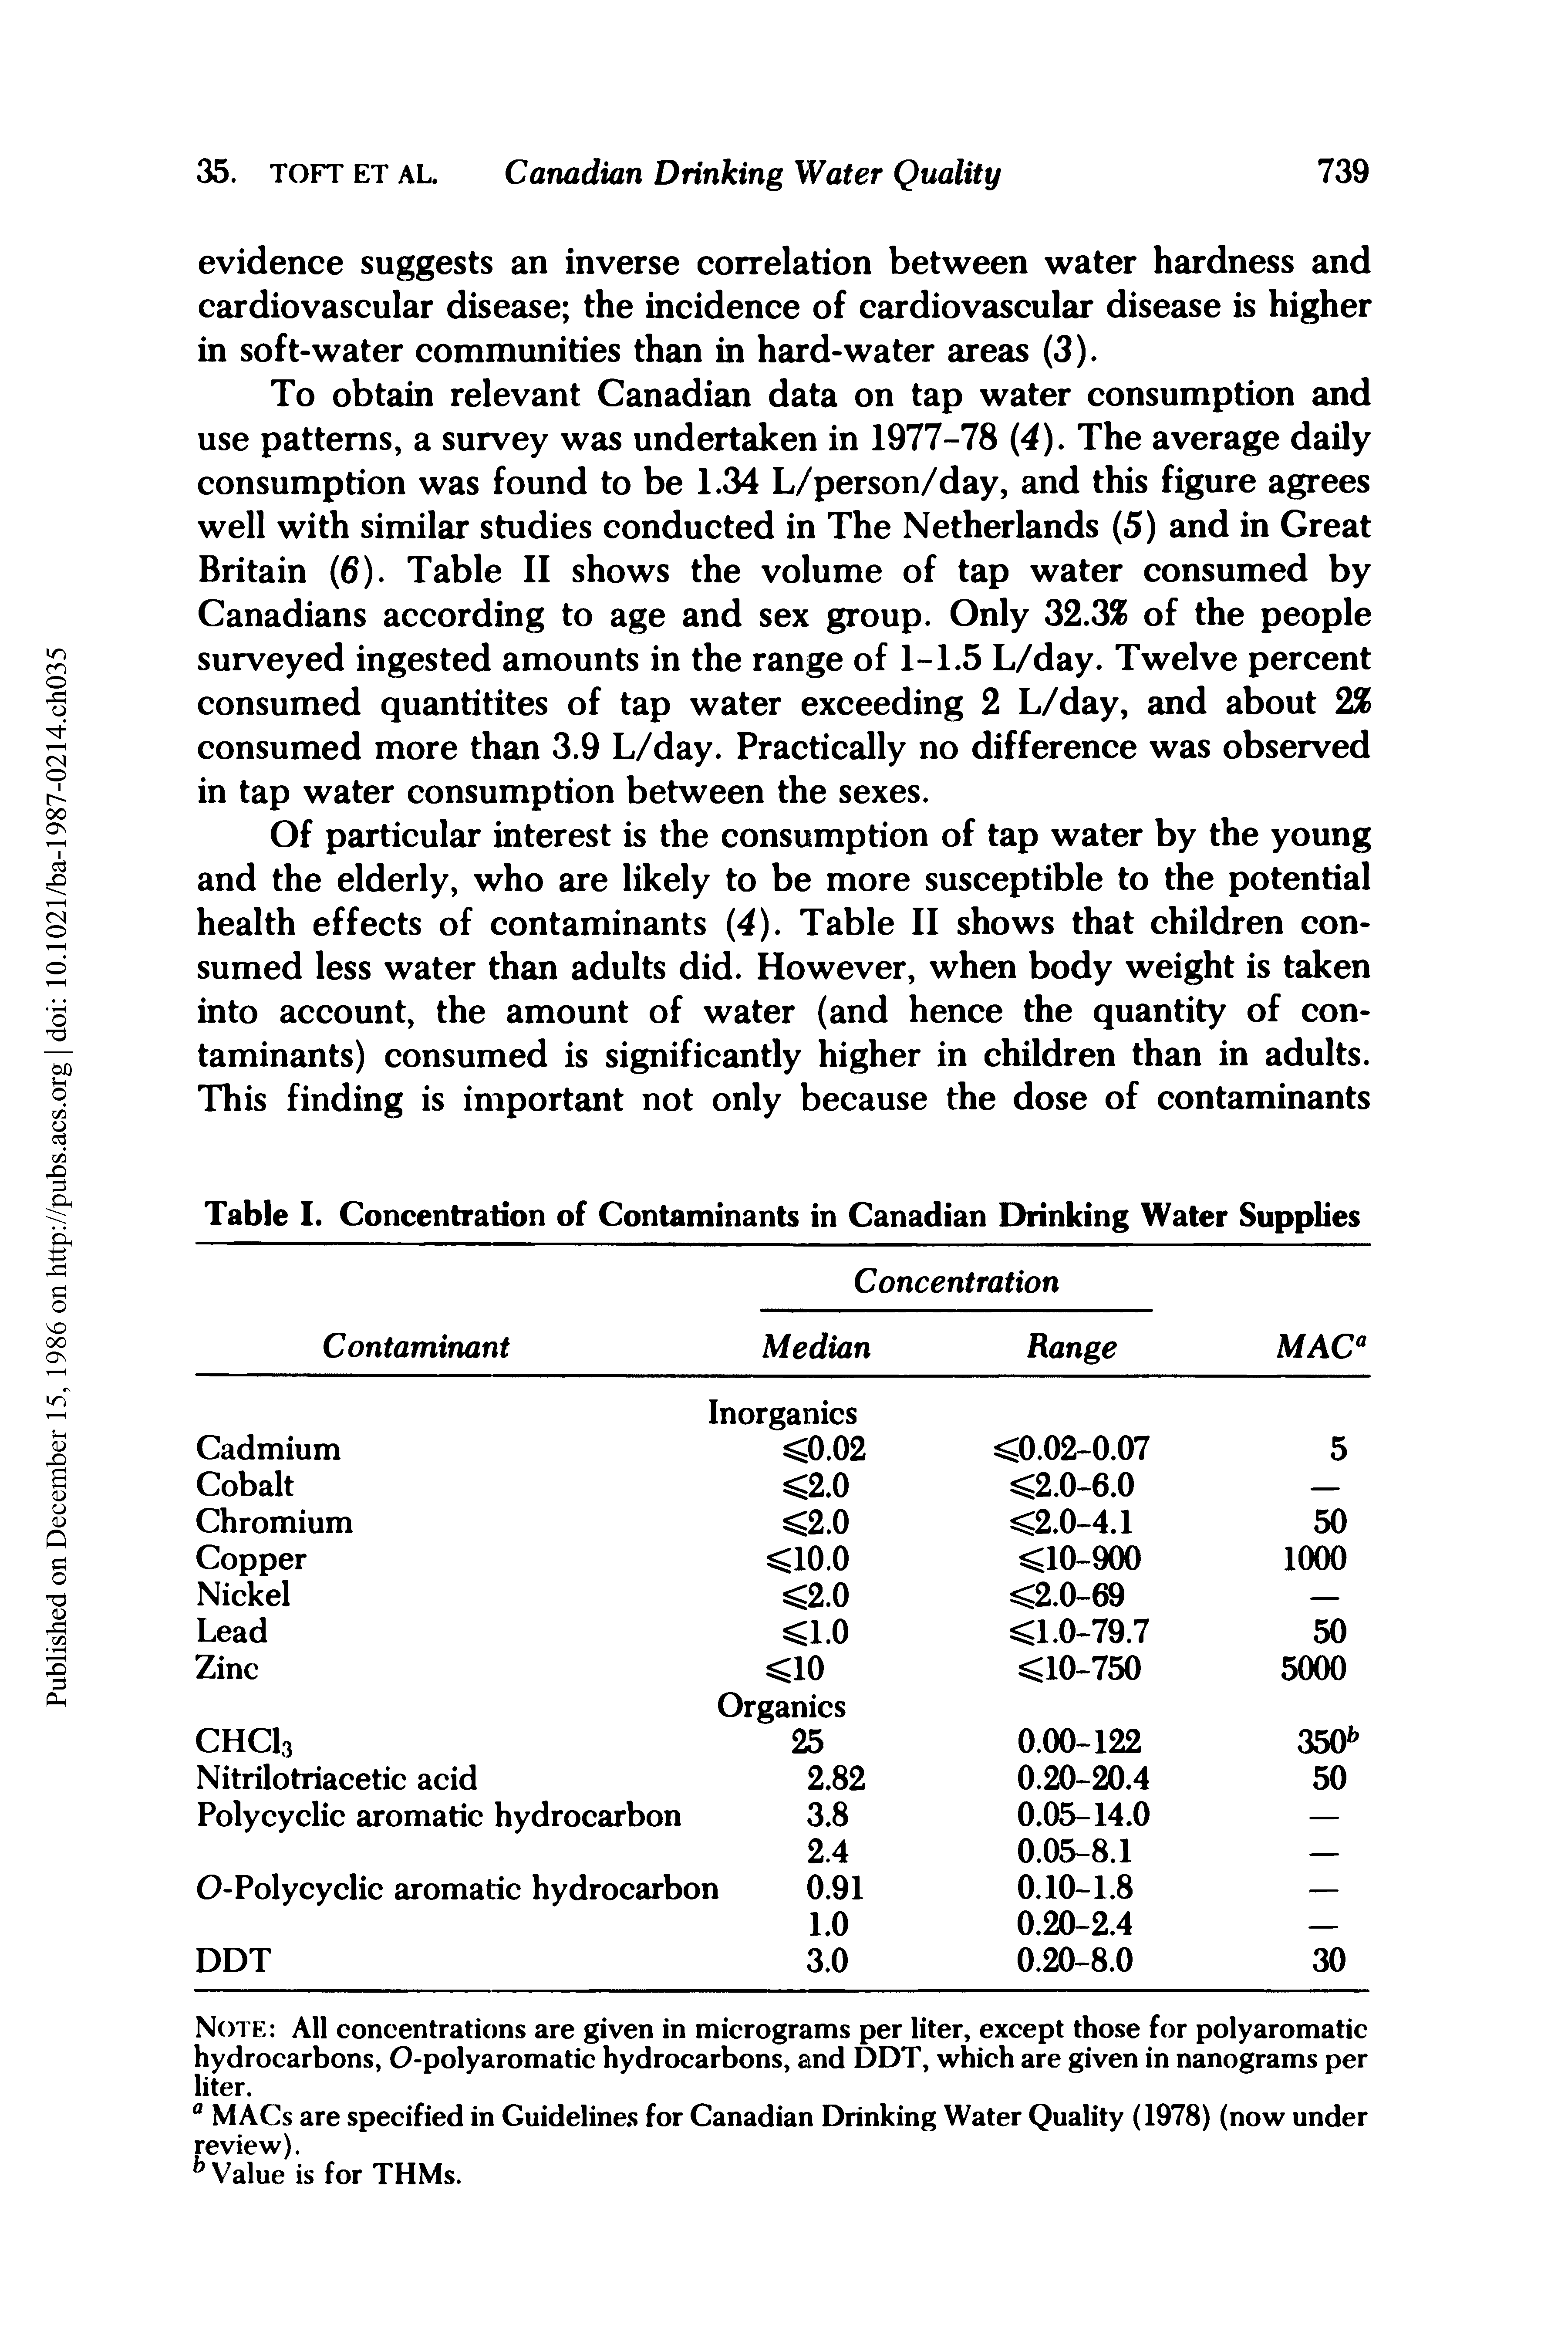 Table I. Concentration of Contaminants in Canadian Drinking Water Supplies...